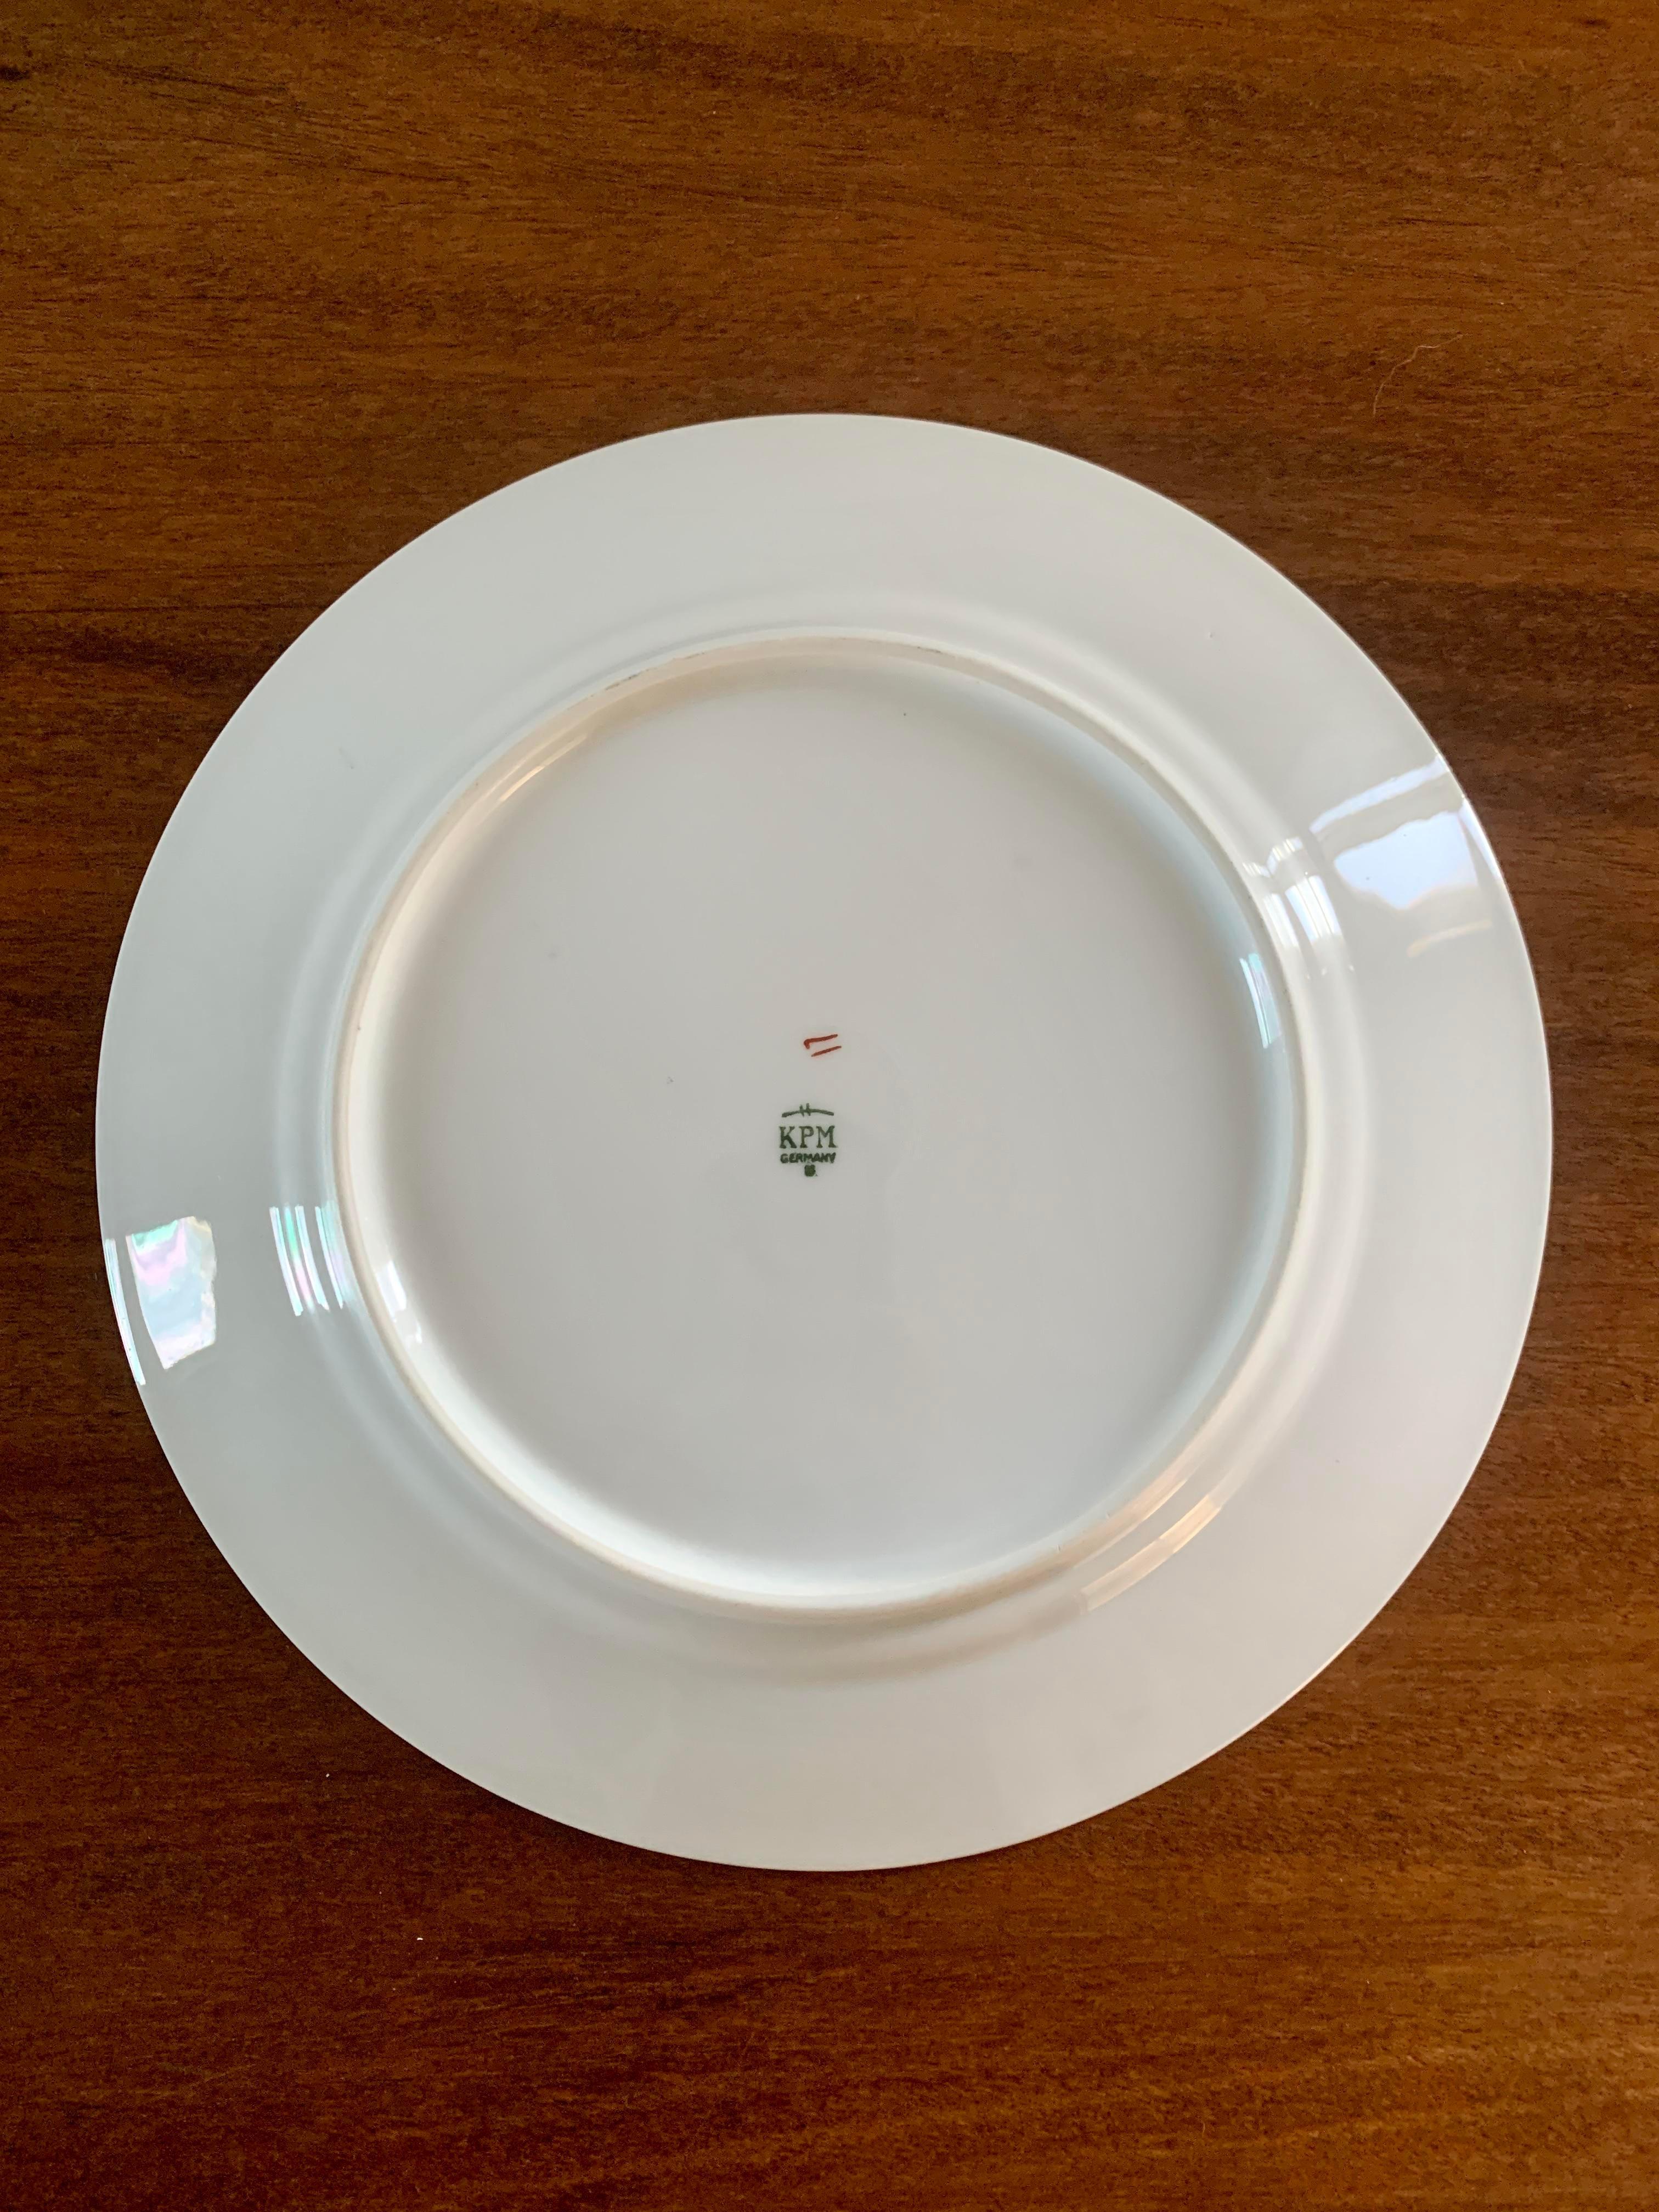 Neoclassical Antique German Greek Key Rimmed Luncheon Plates by Kpm, 1920s For Sale